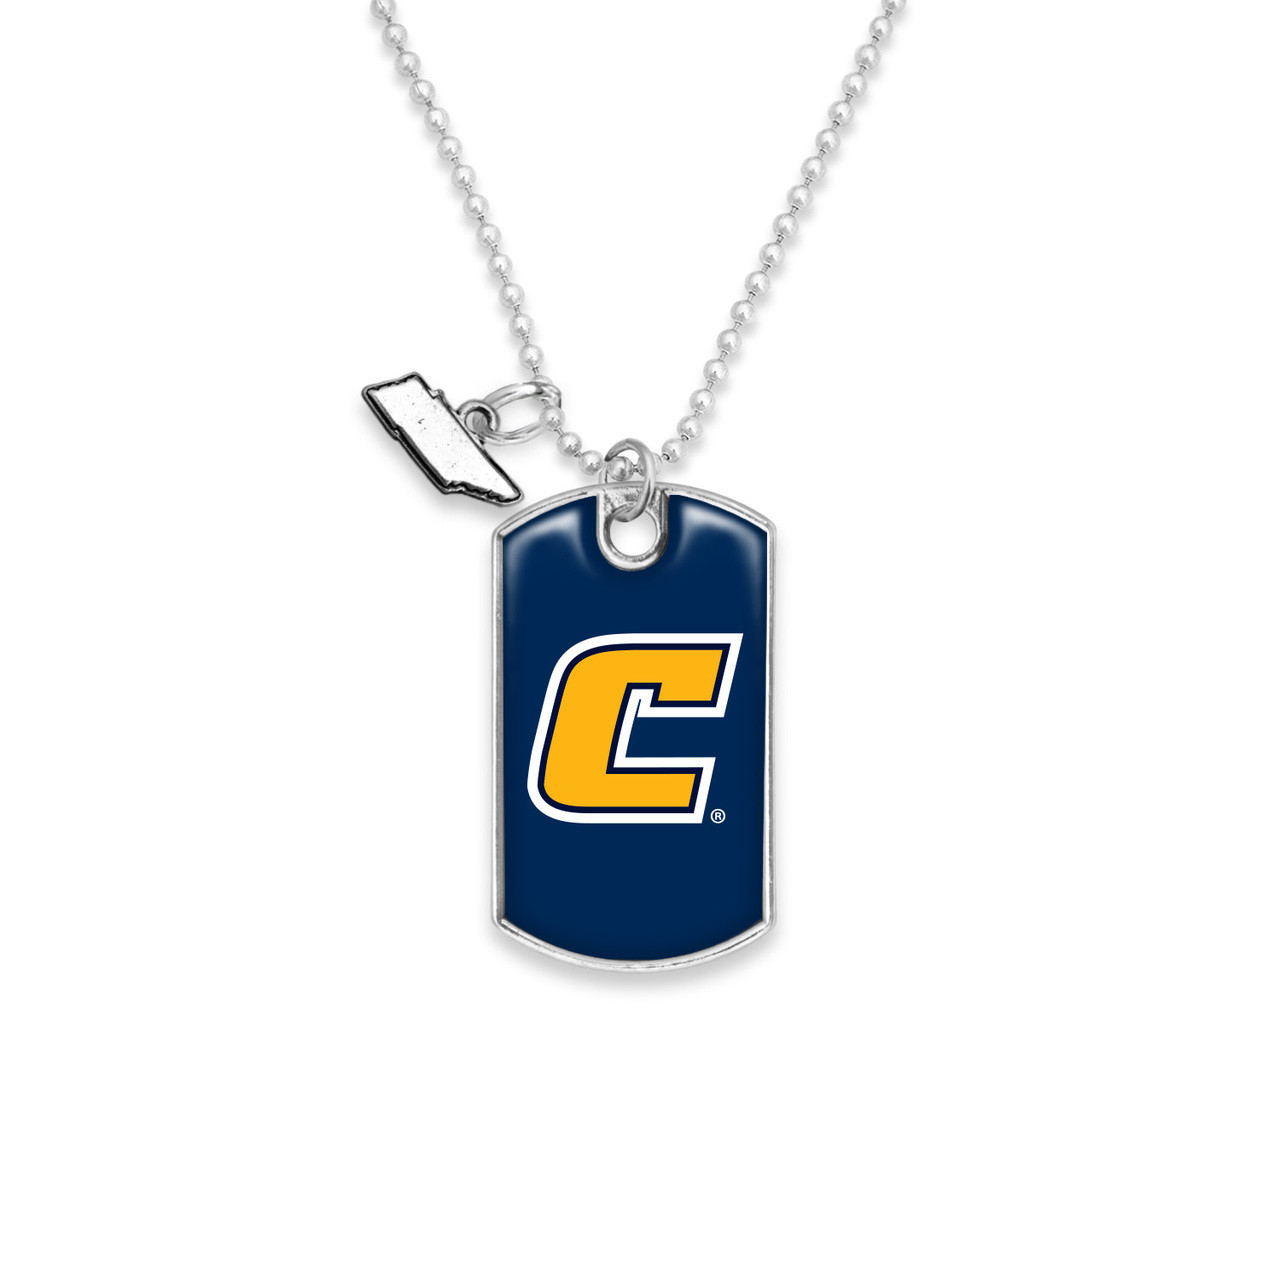 Chattanooga (Tennessee) Mocs Dog Tag Rear View Mirror Charm